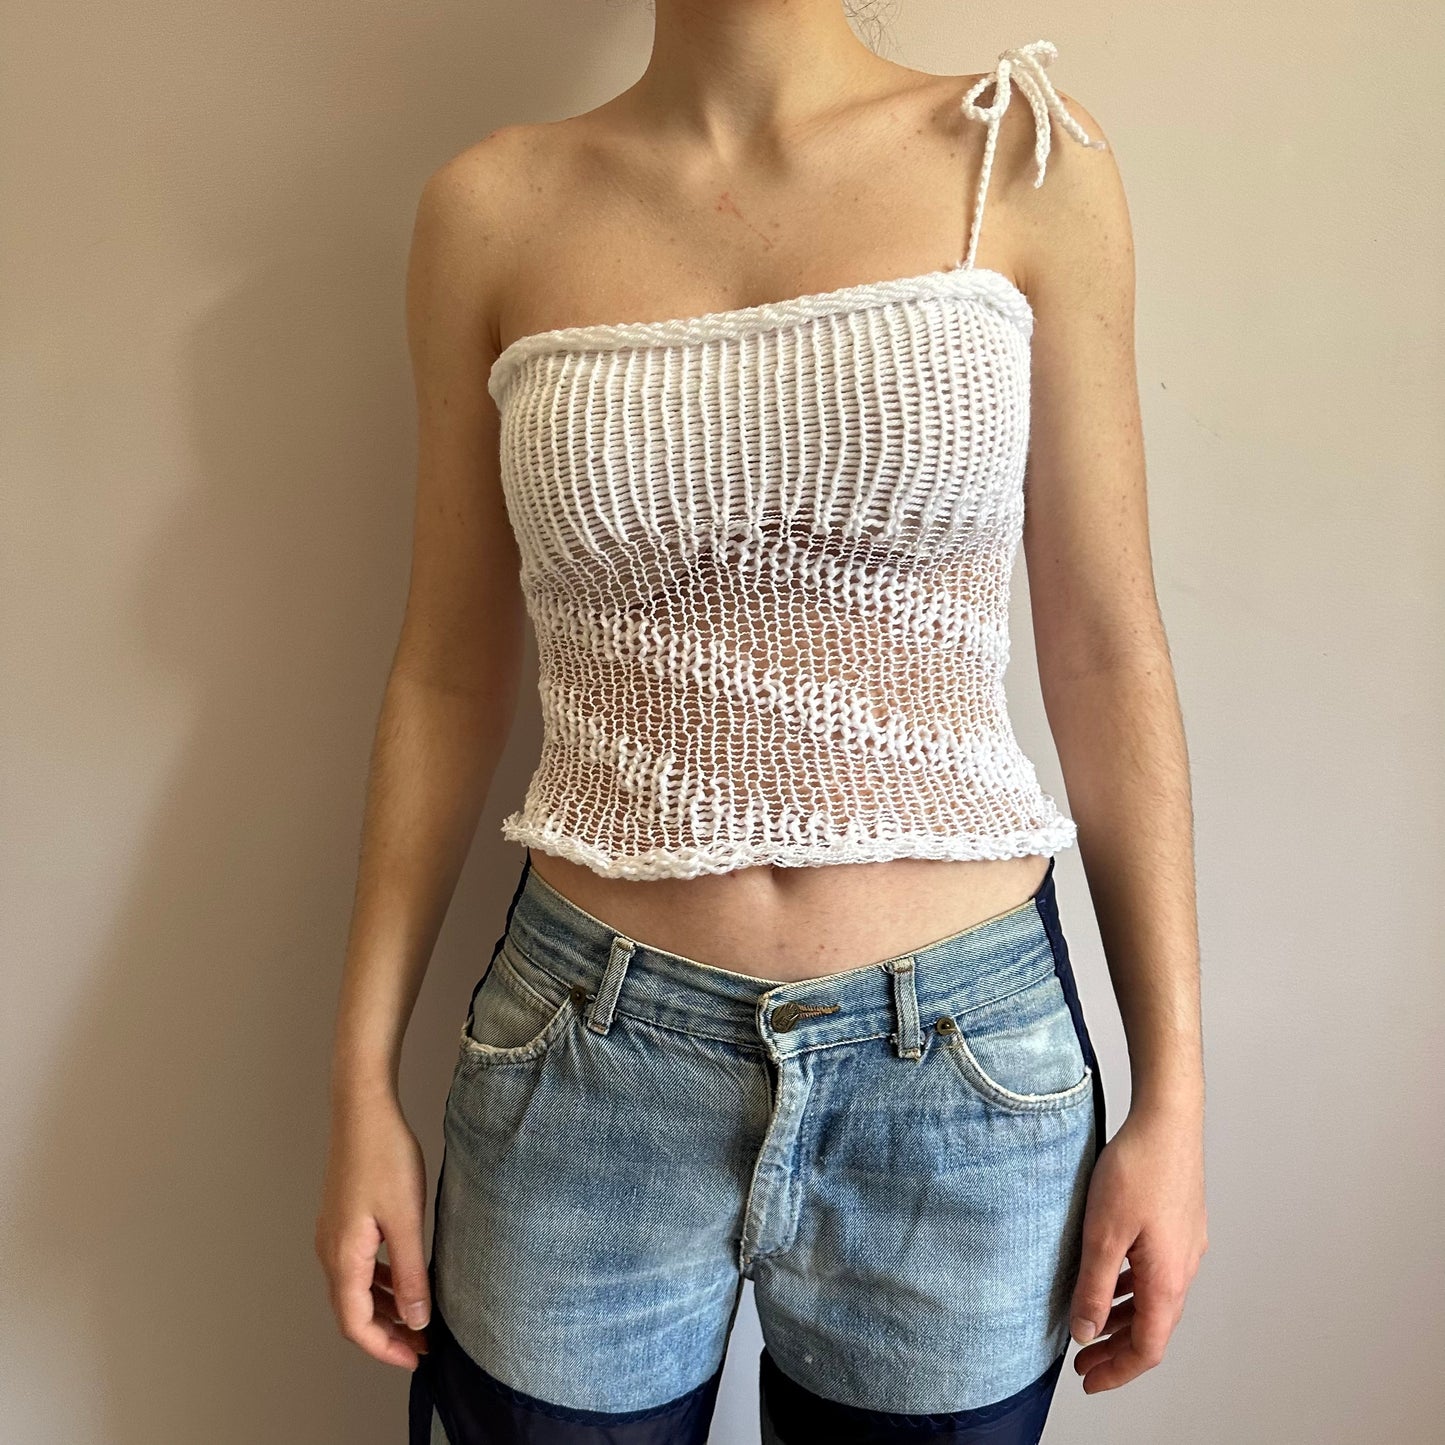 Handmade white lace knitted  asymmetrical top with bow strap